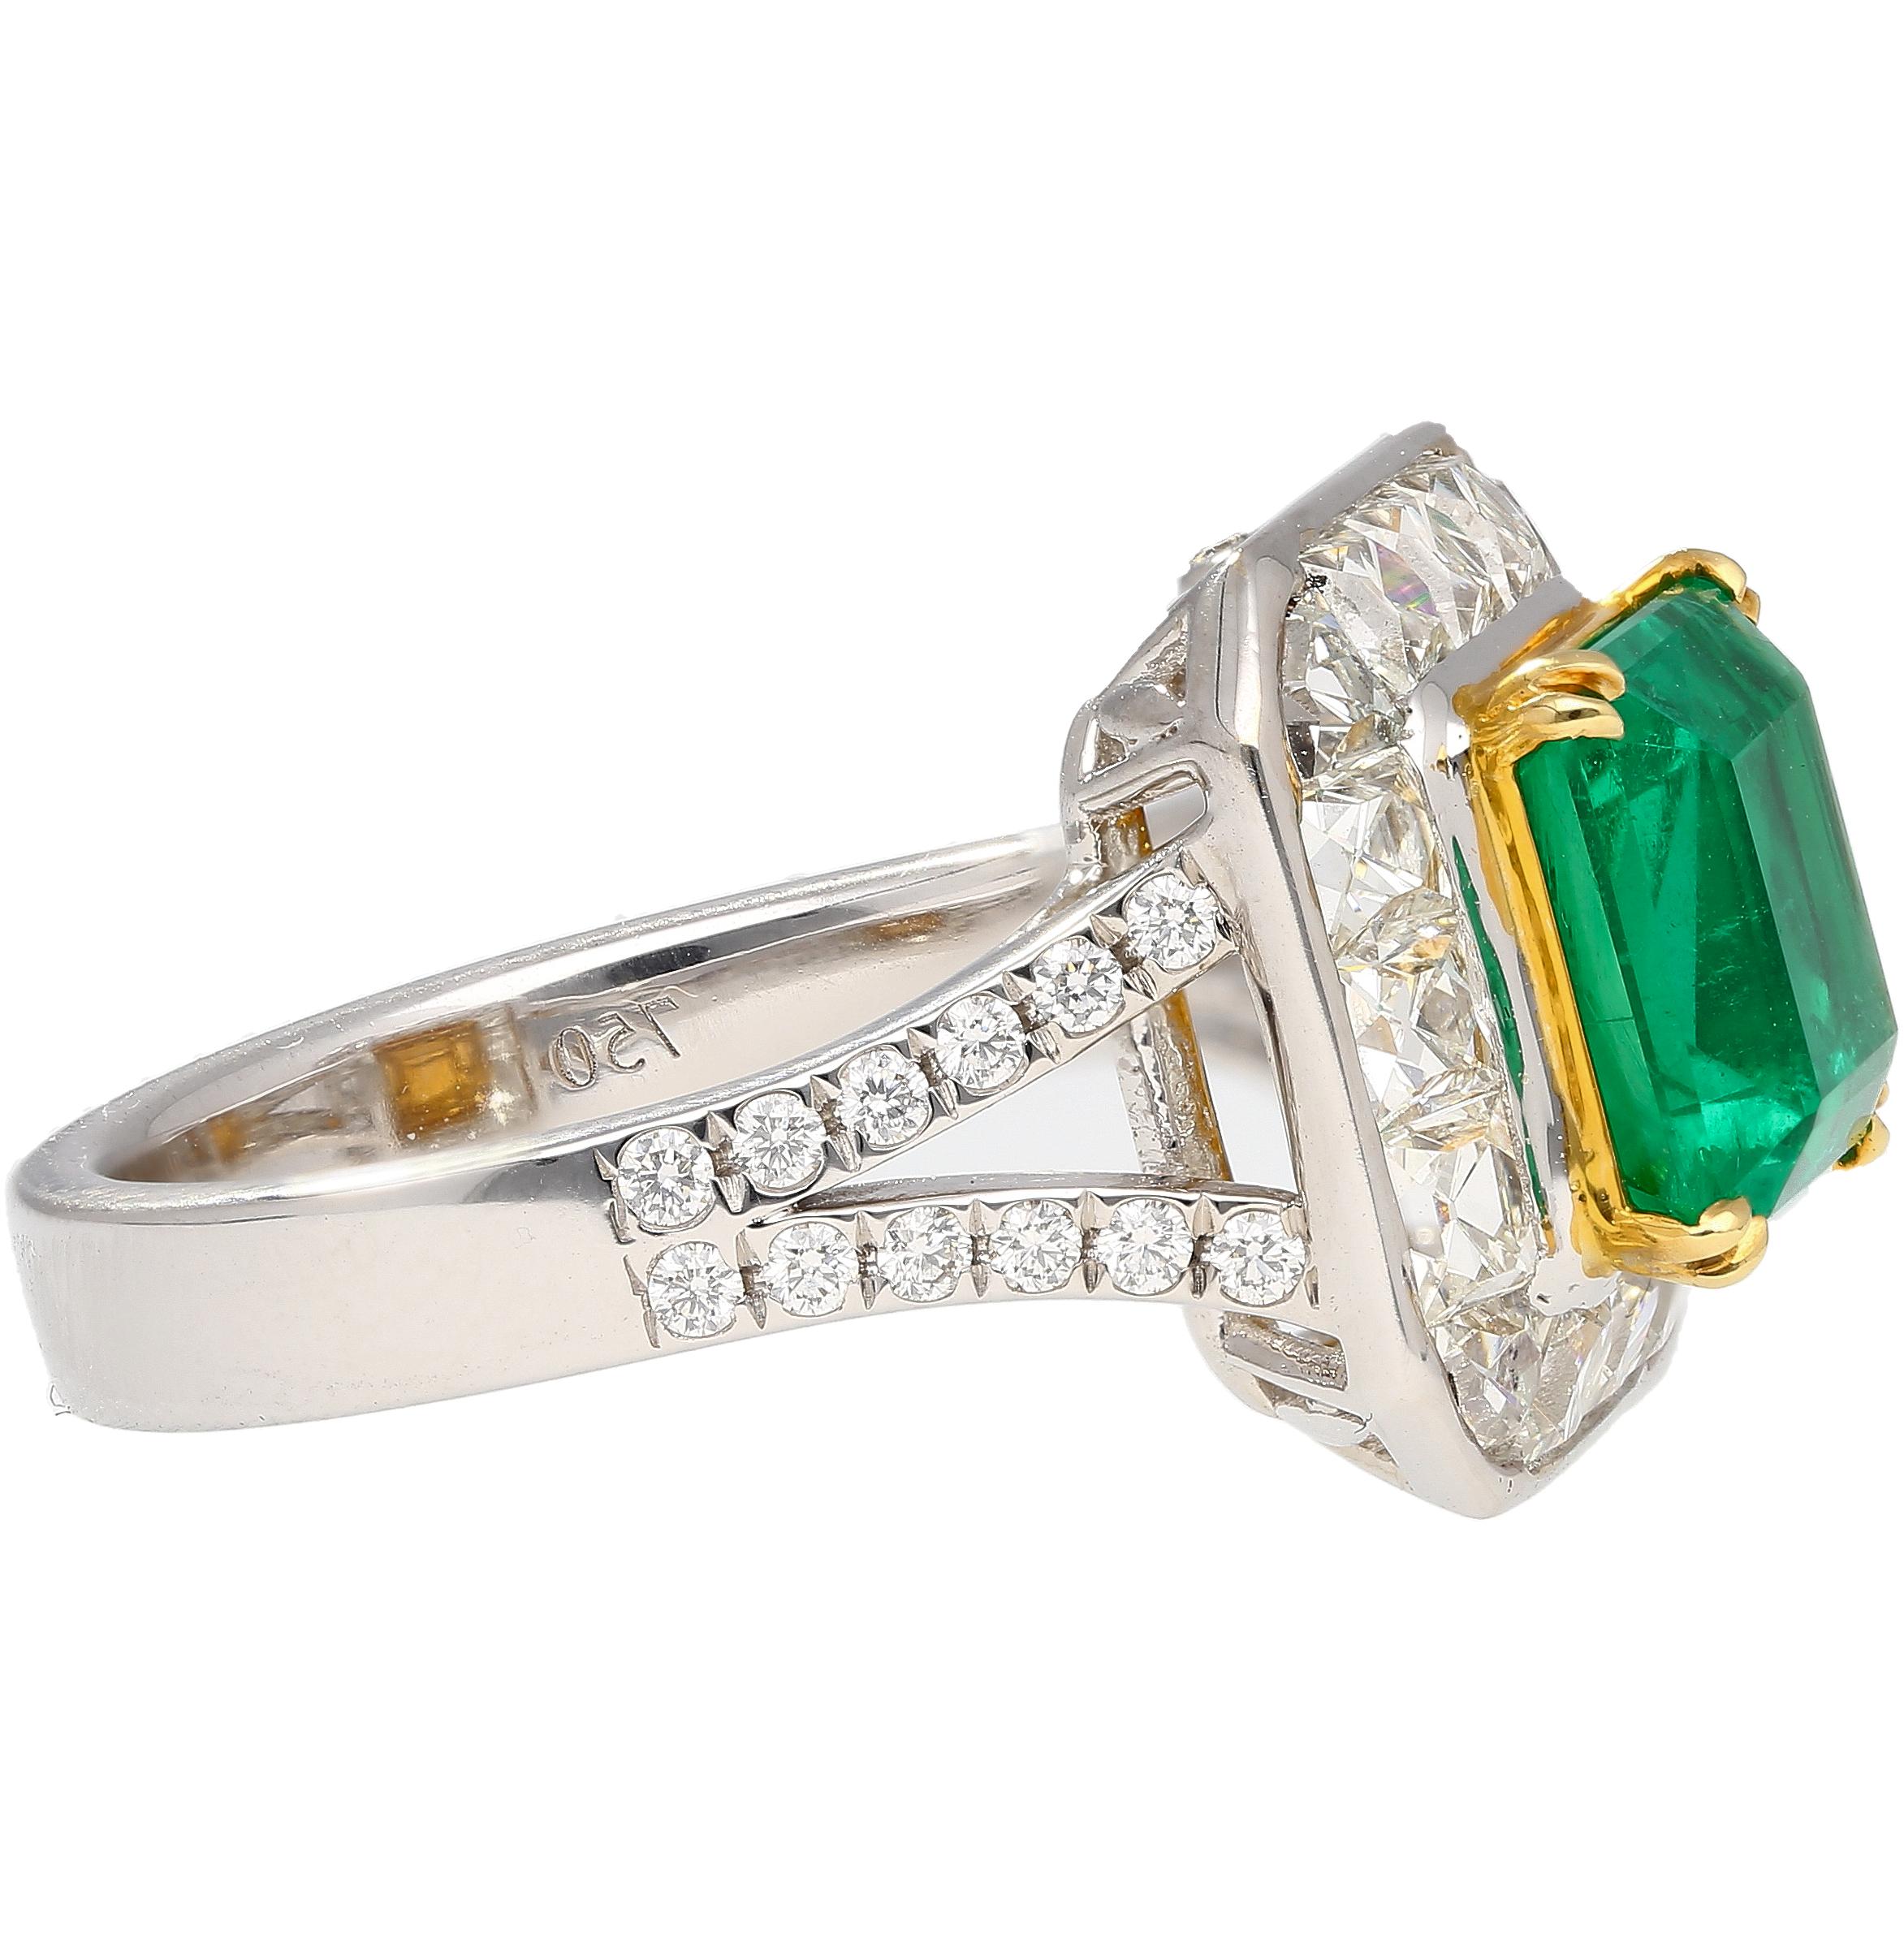 Women's AGL Certified No Oil 2.54 Carat Colombian Emerald & Old French Cut Diamond Ring For Sale